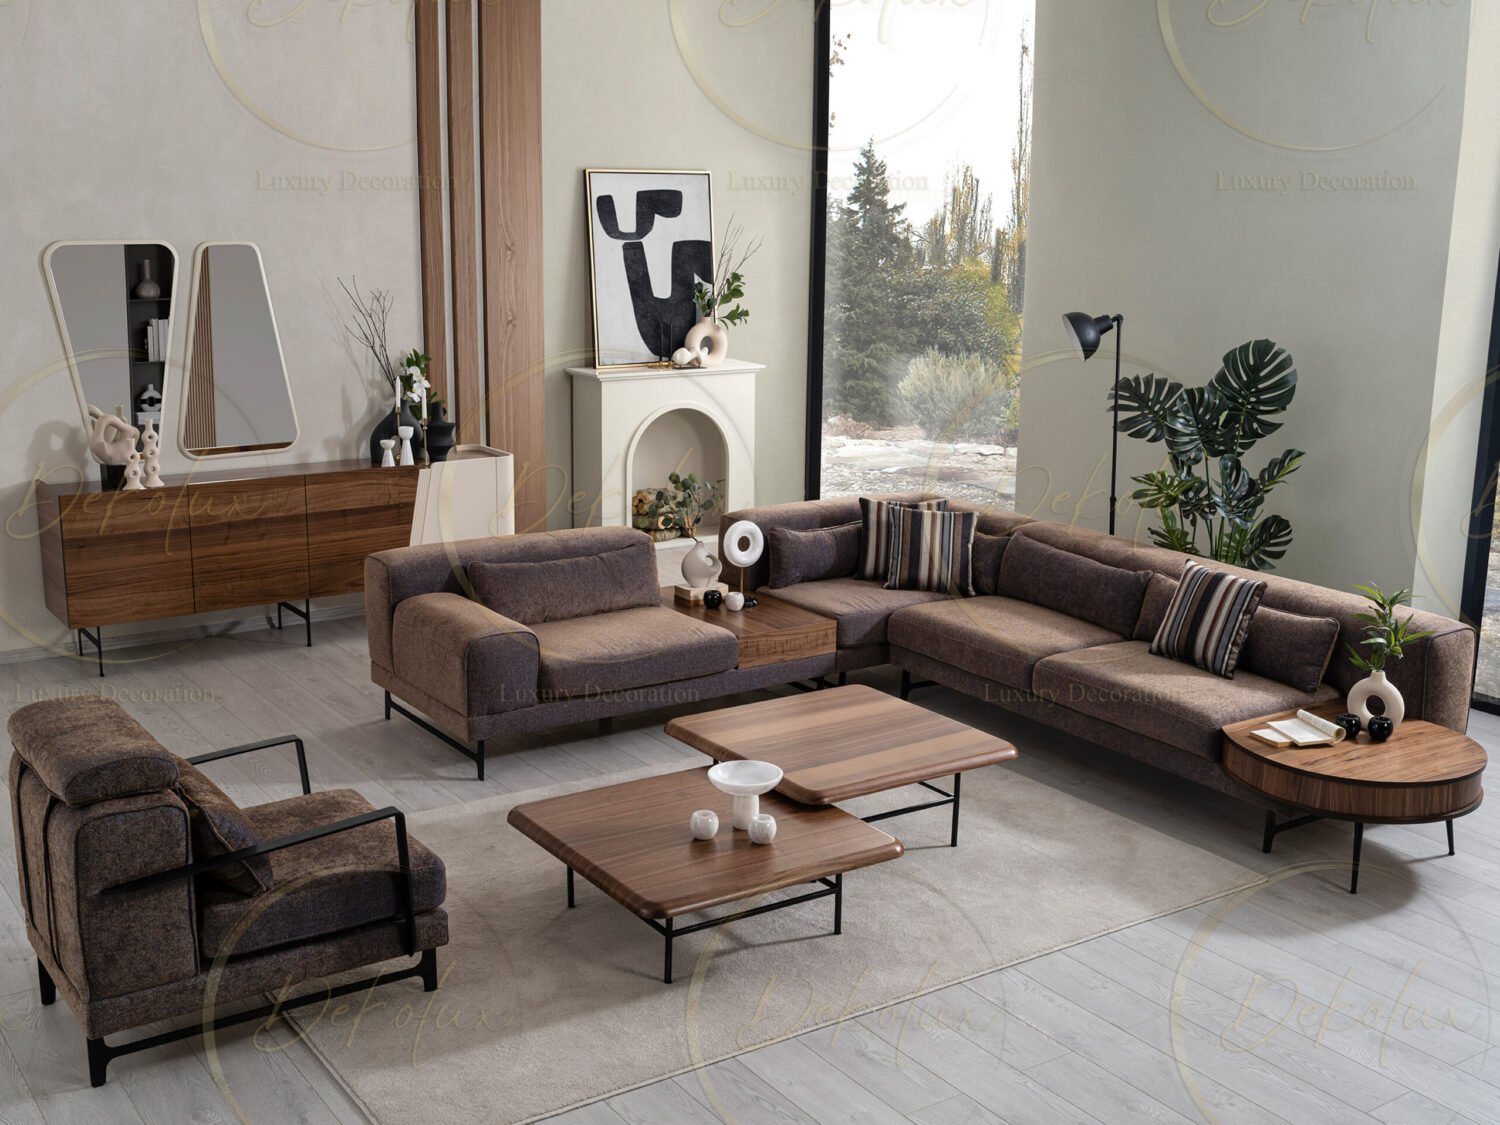 Sectional sofa collection